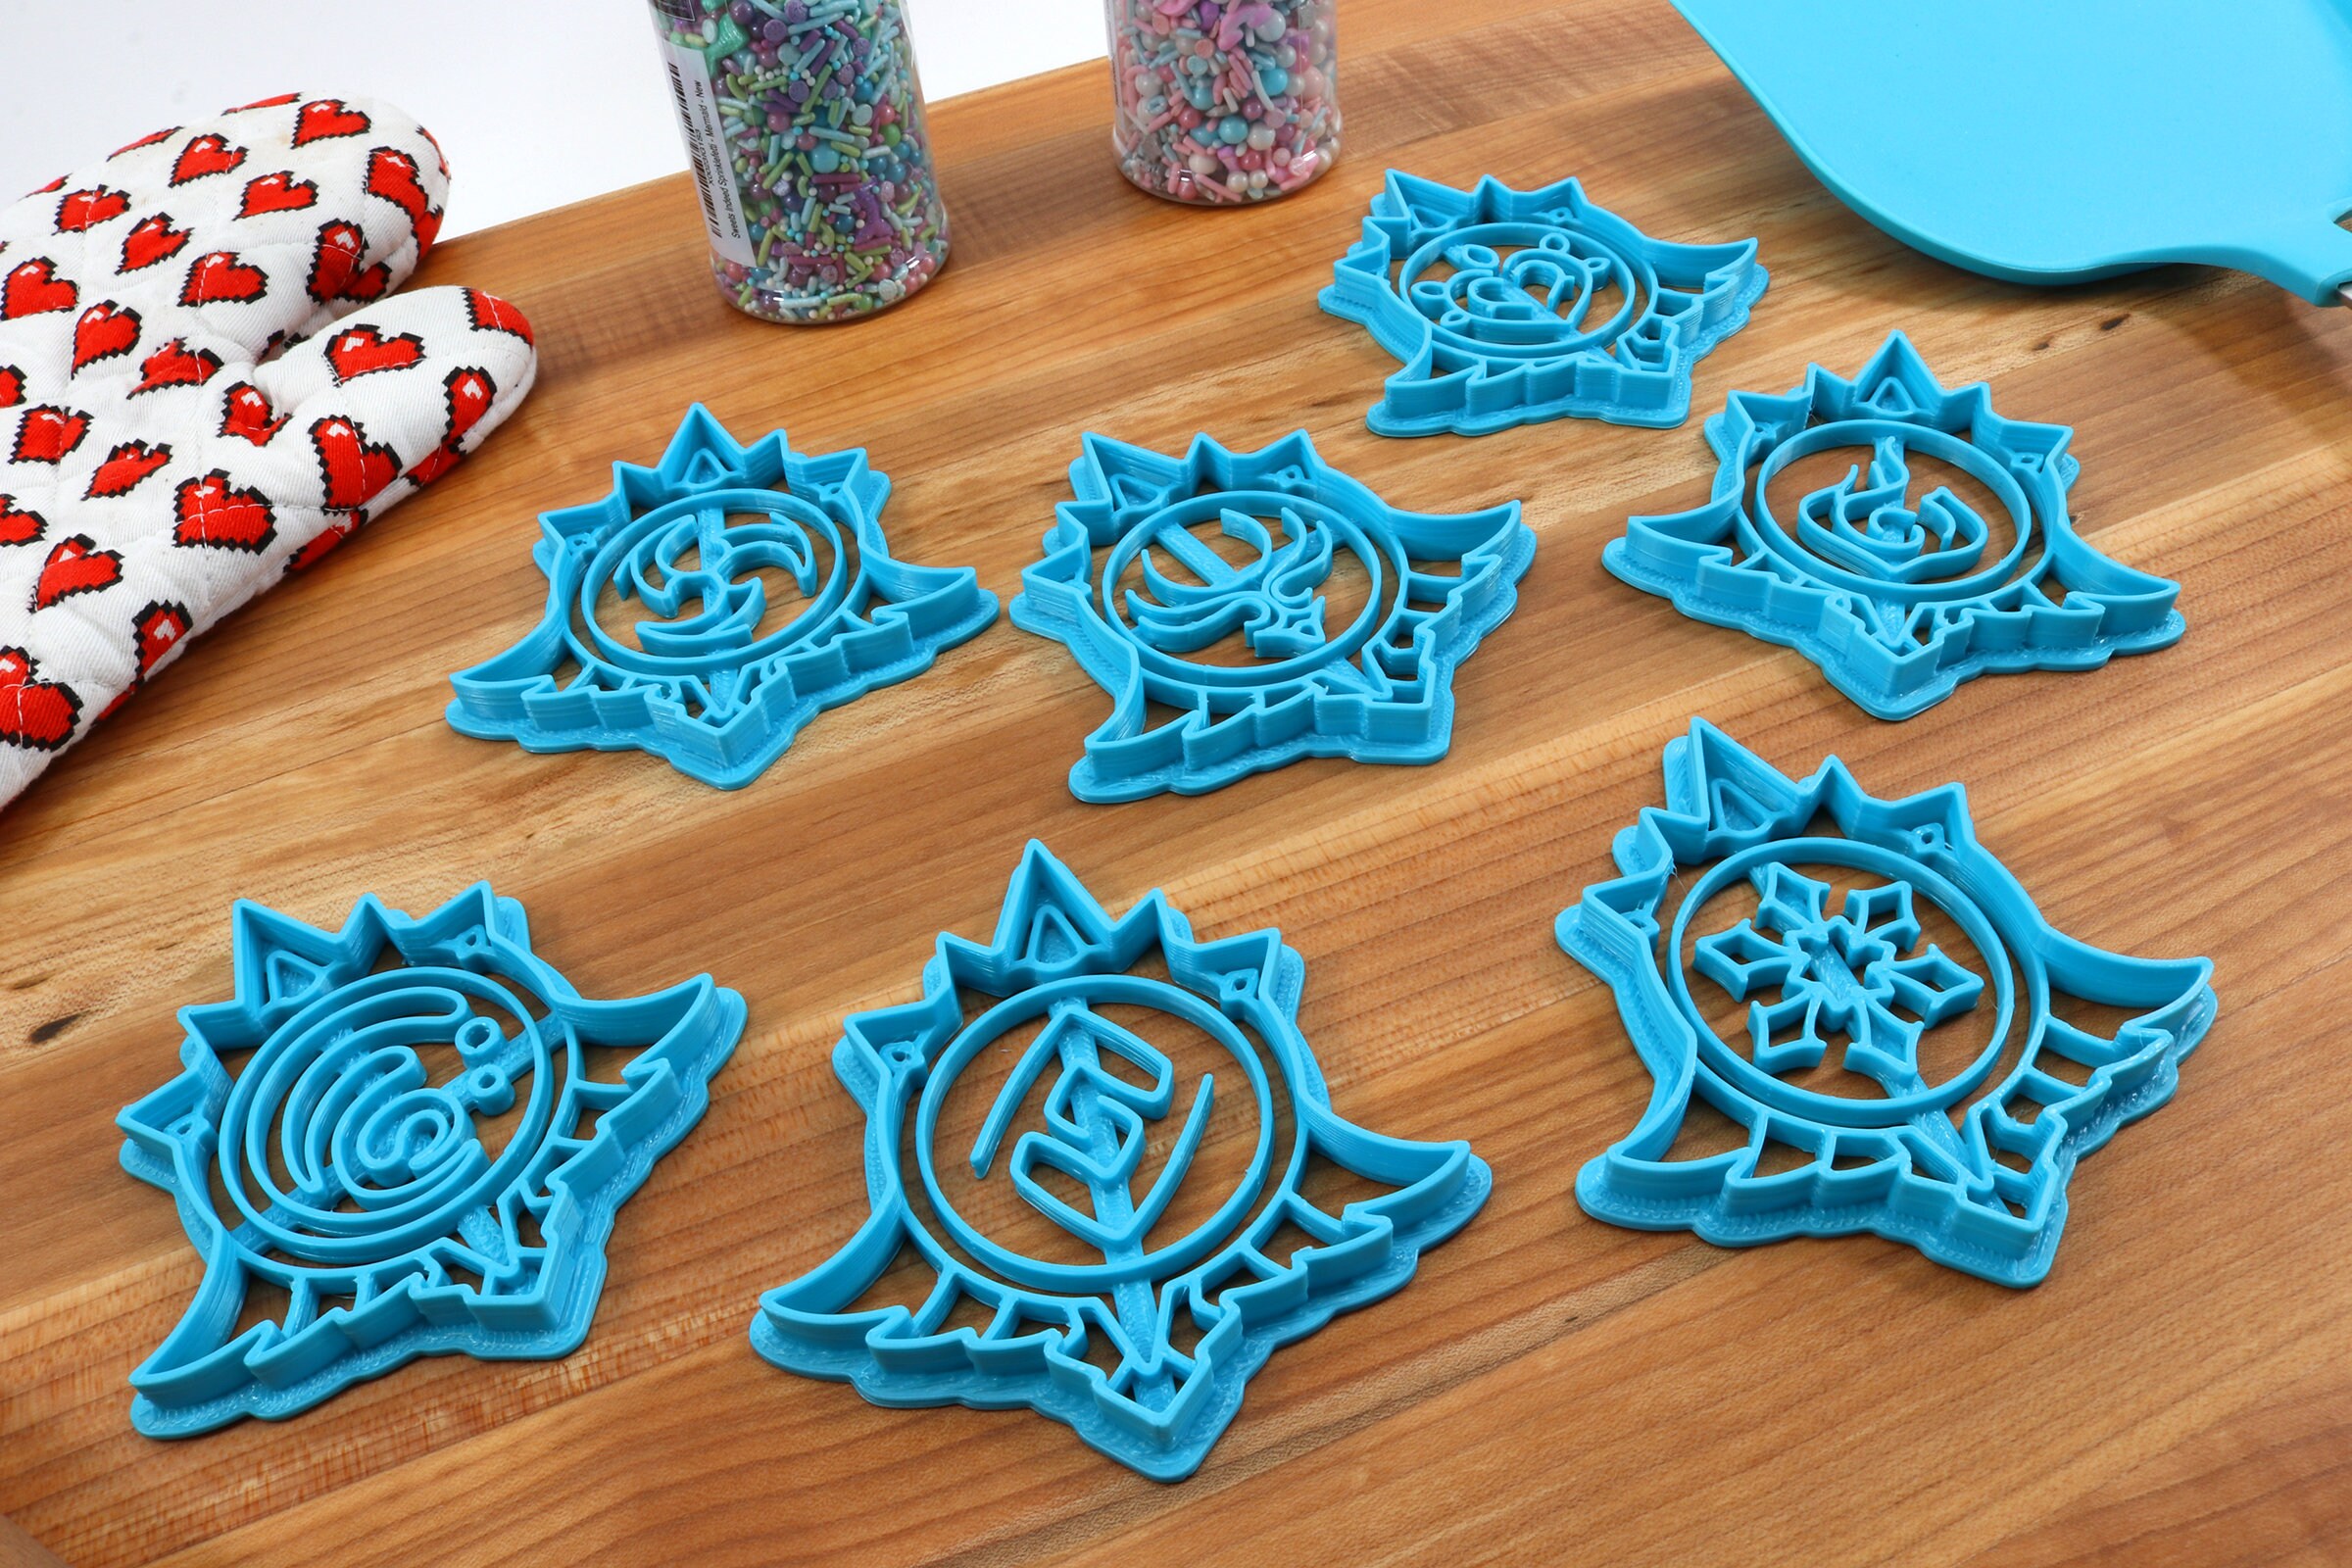 Geo Pyro Electro Anemo H Dendro Genshin Impact Vision Cookie Cutters- Cryo 